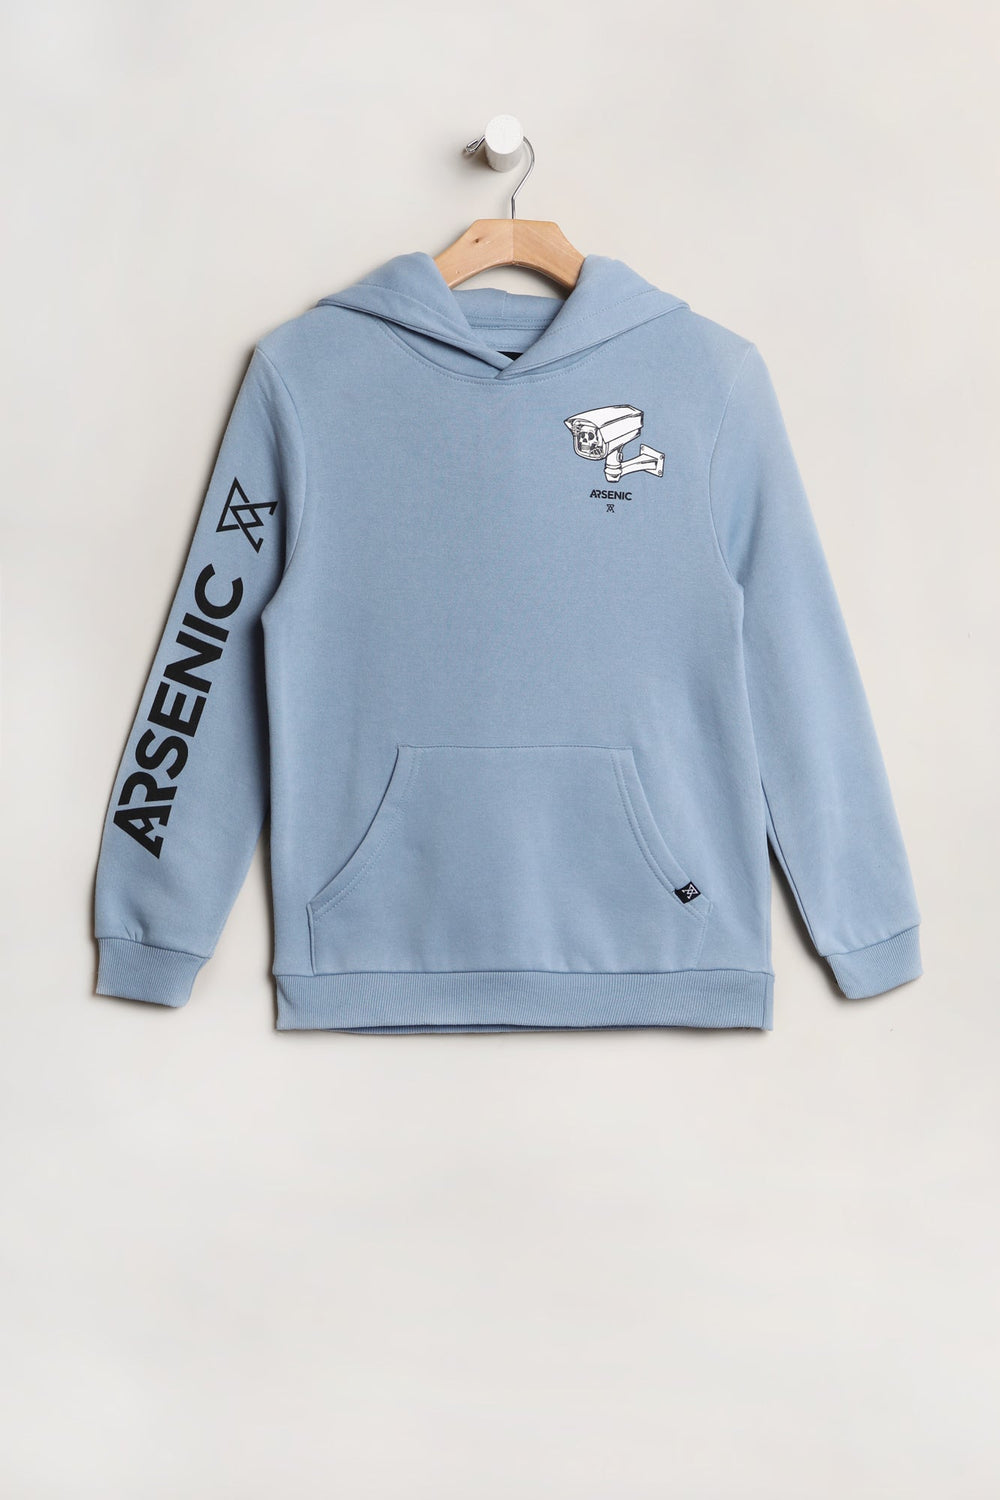 Arsenic Youth Say Cheese Hoodie Baby Blue